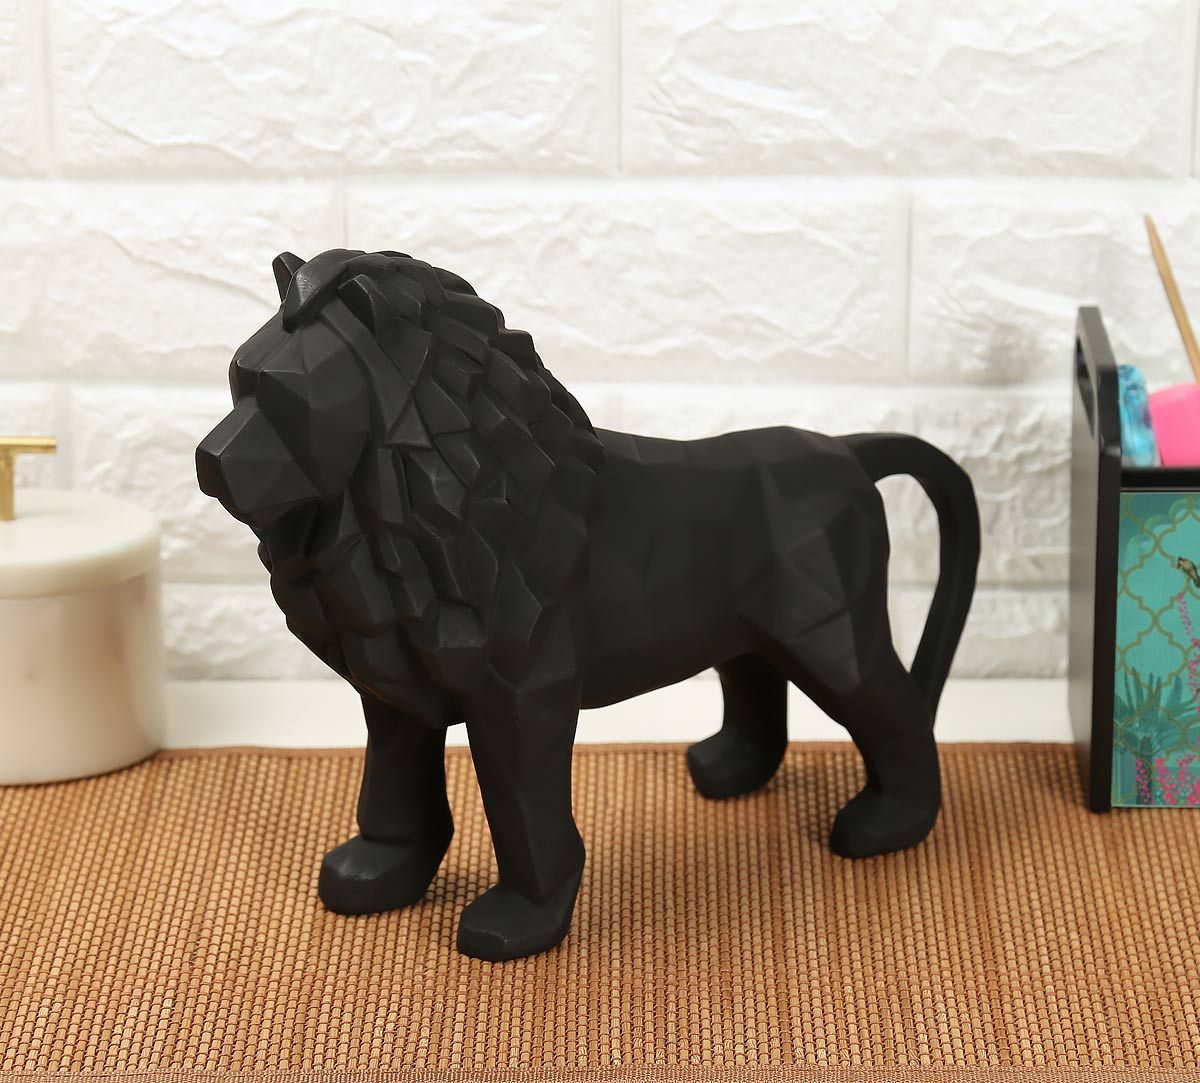 Shop for animal statues online | India Circus